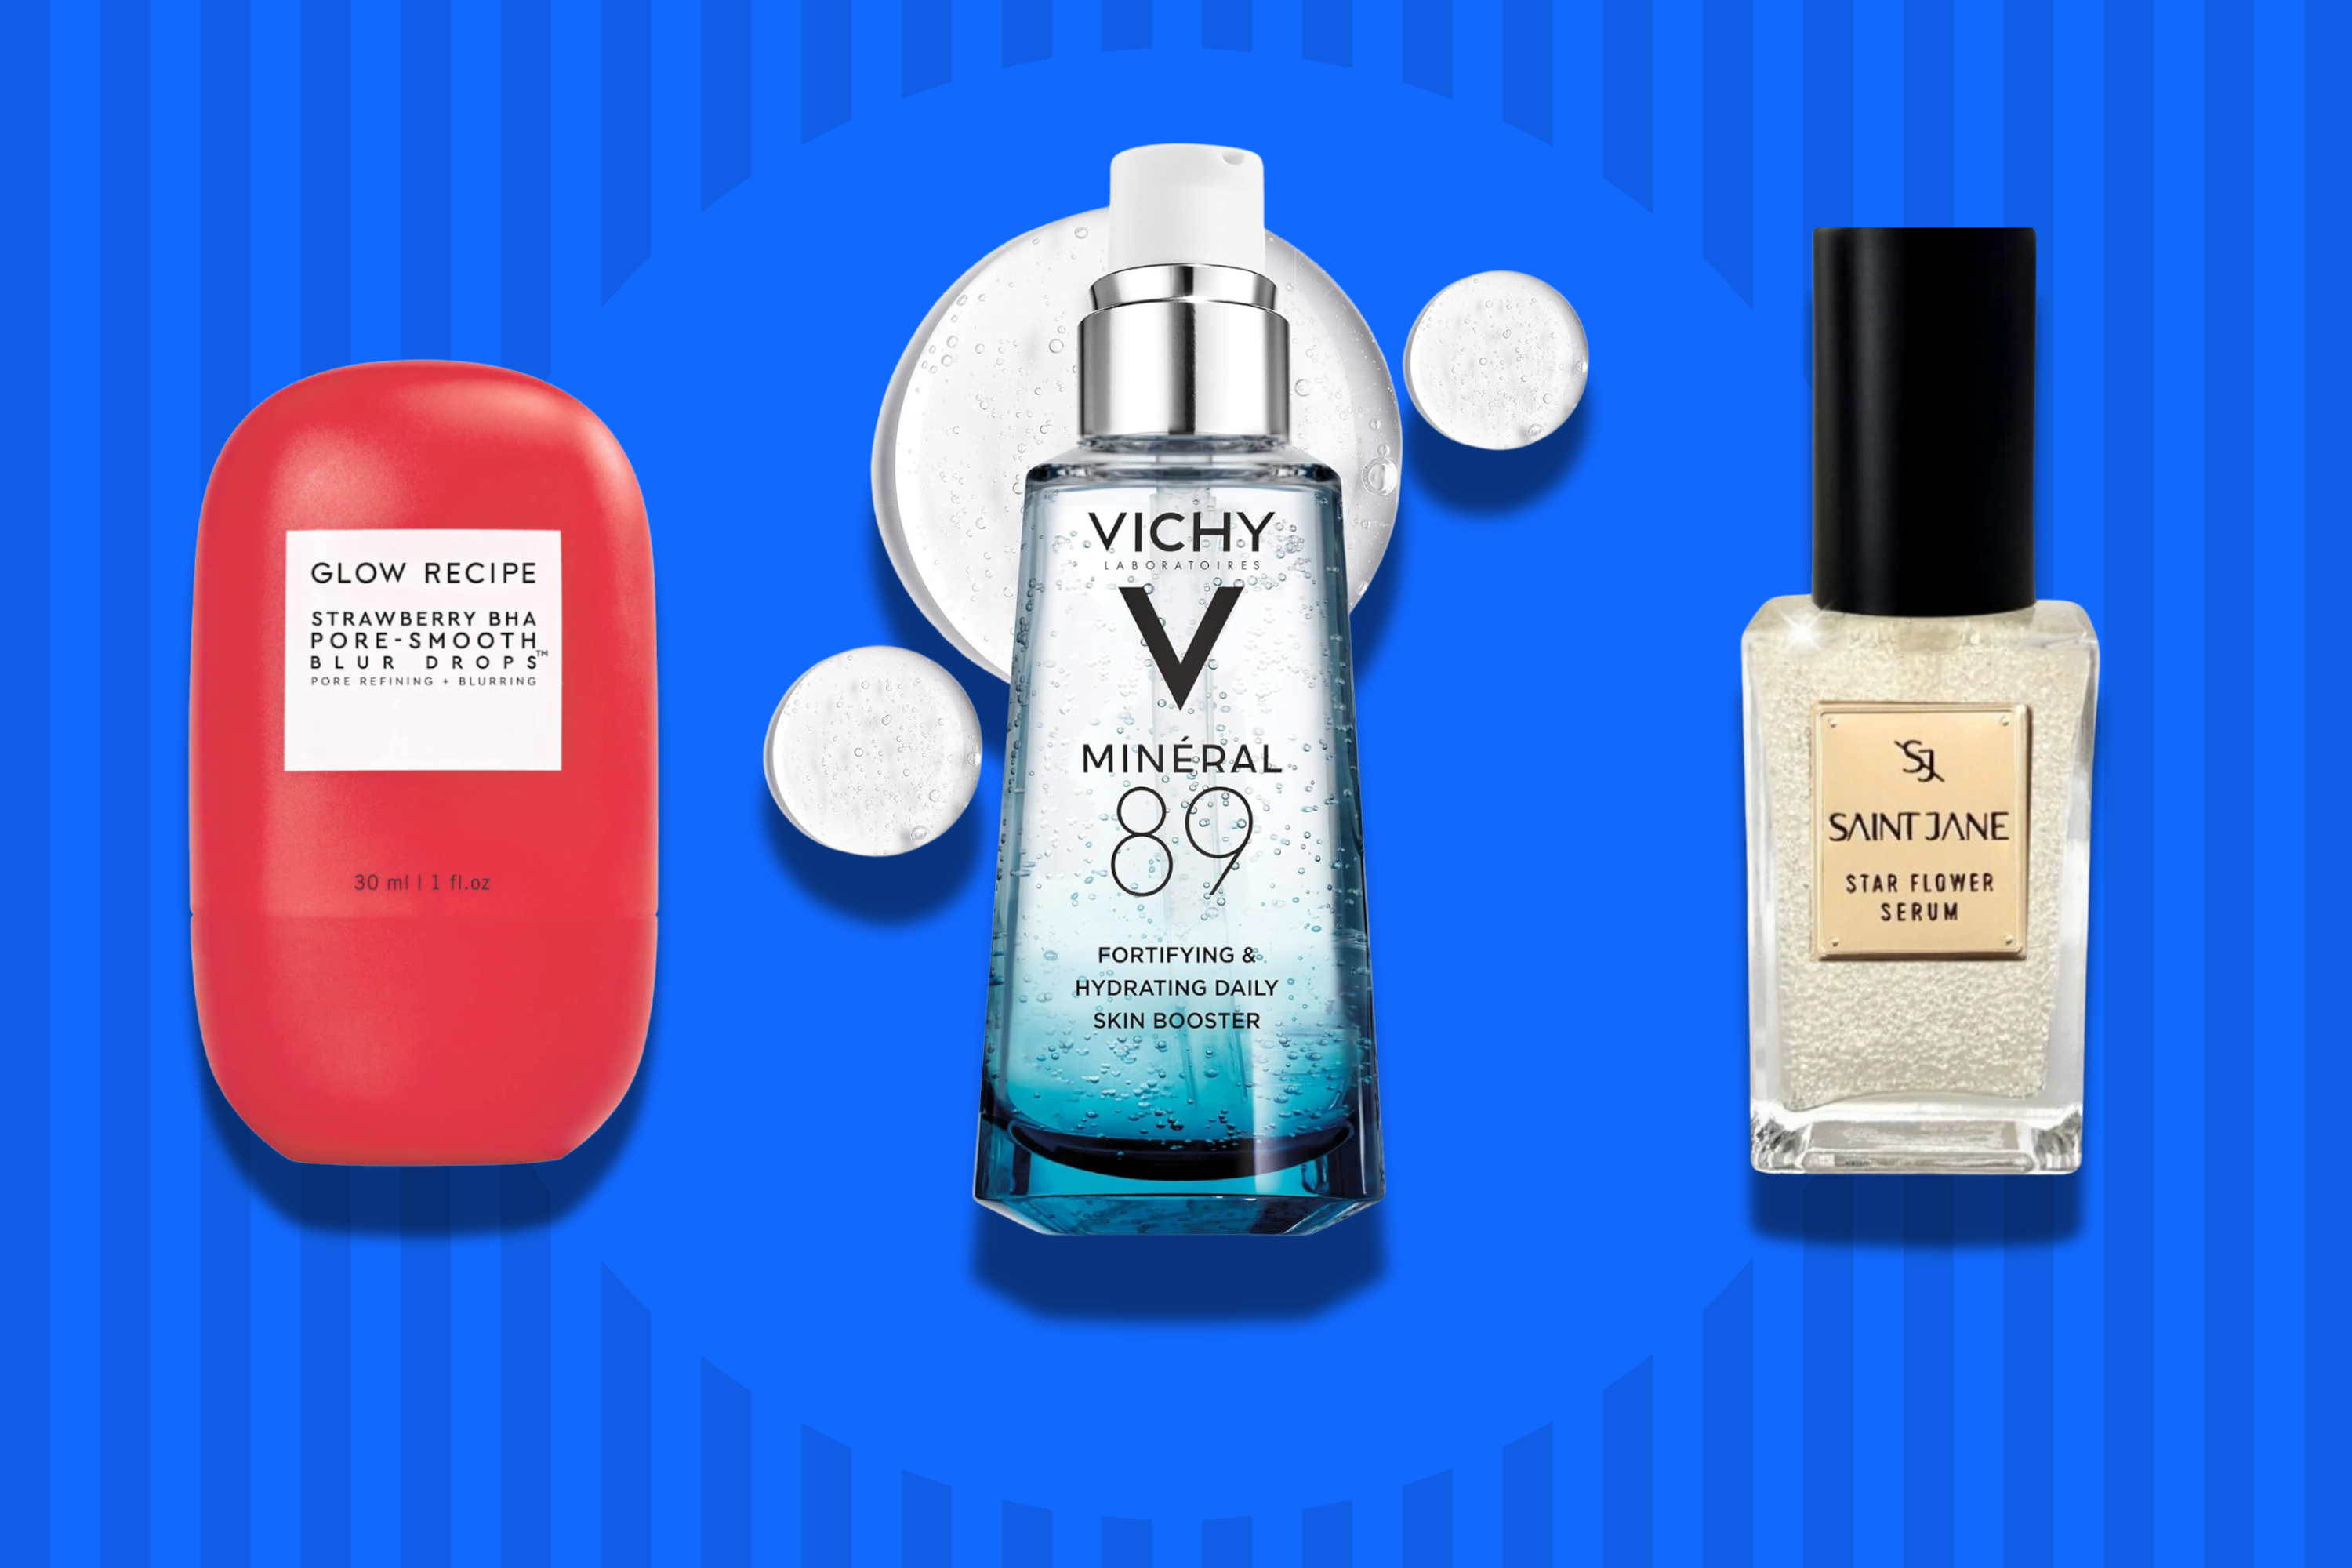 Glow Recipe, Vichy and Saint Jane face serums on a bright background.